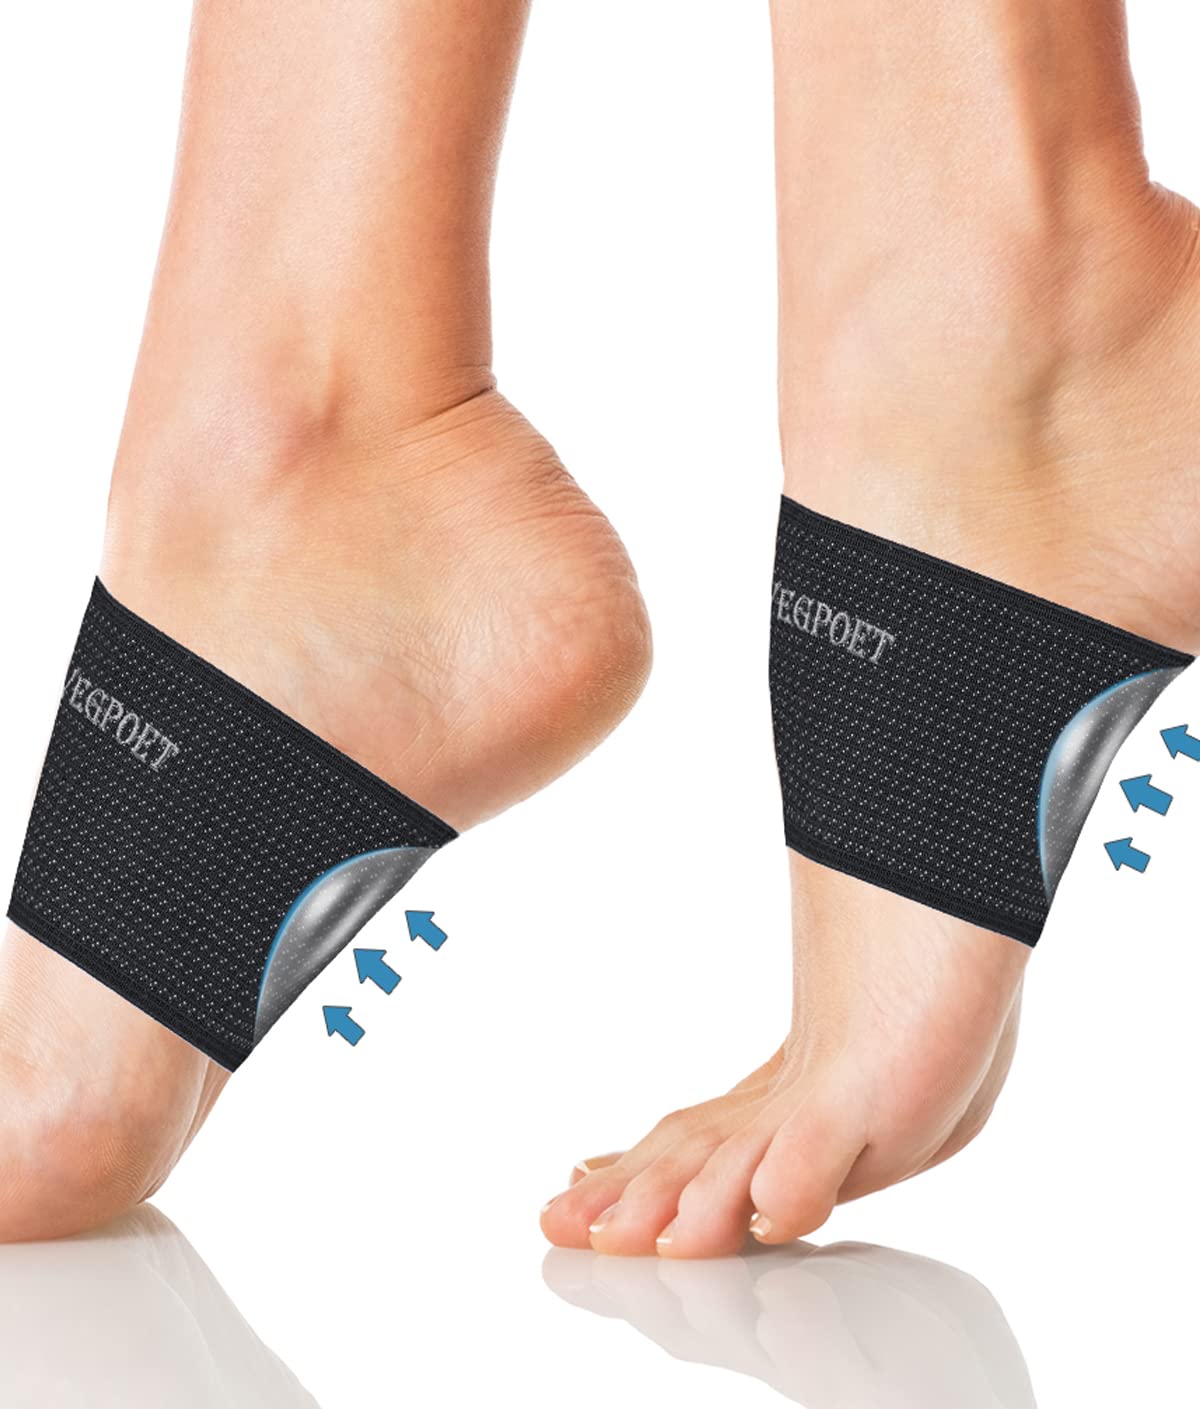 Copper-Infused Plantar Fasciitis Foot Sleeves: Arch Pain Relief